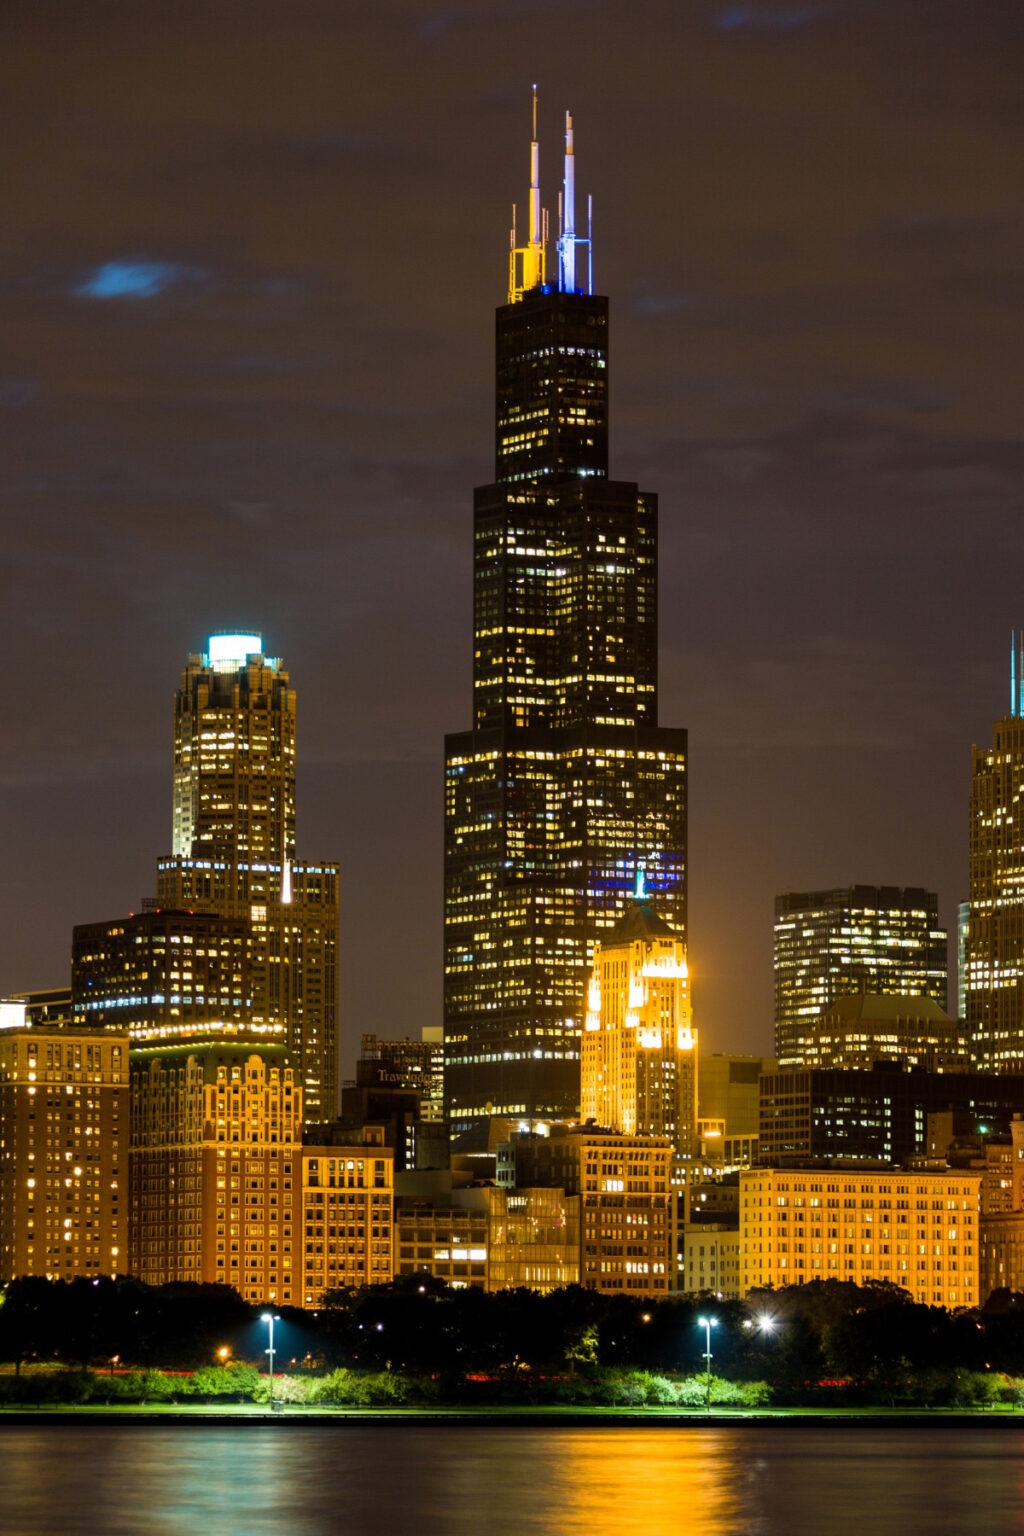 Sears Tower - World's Tallest Towers